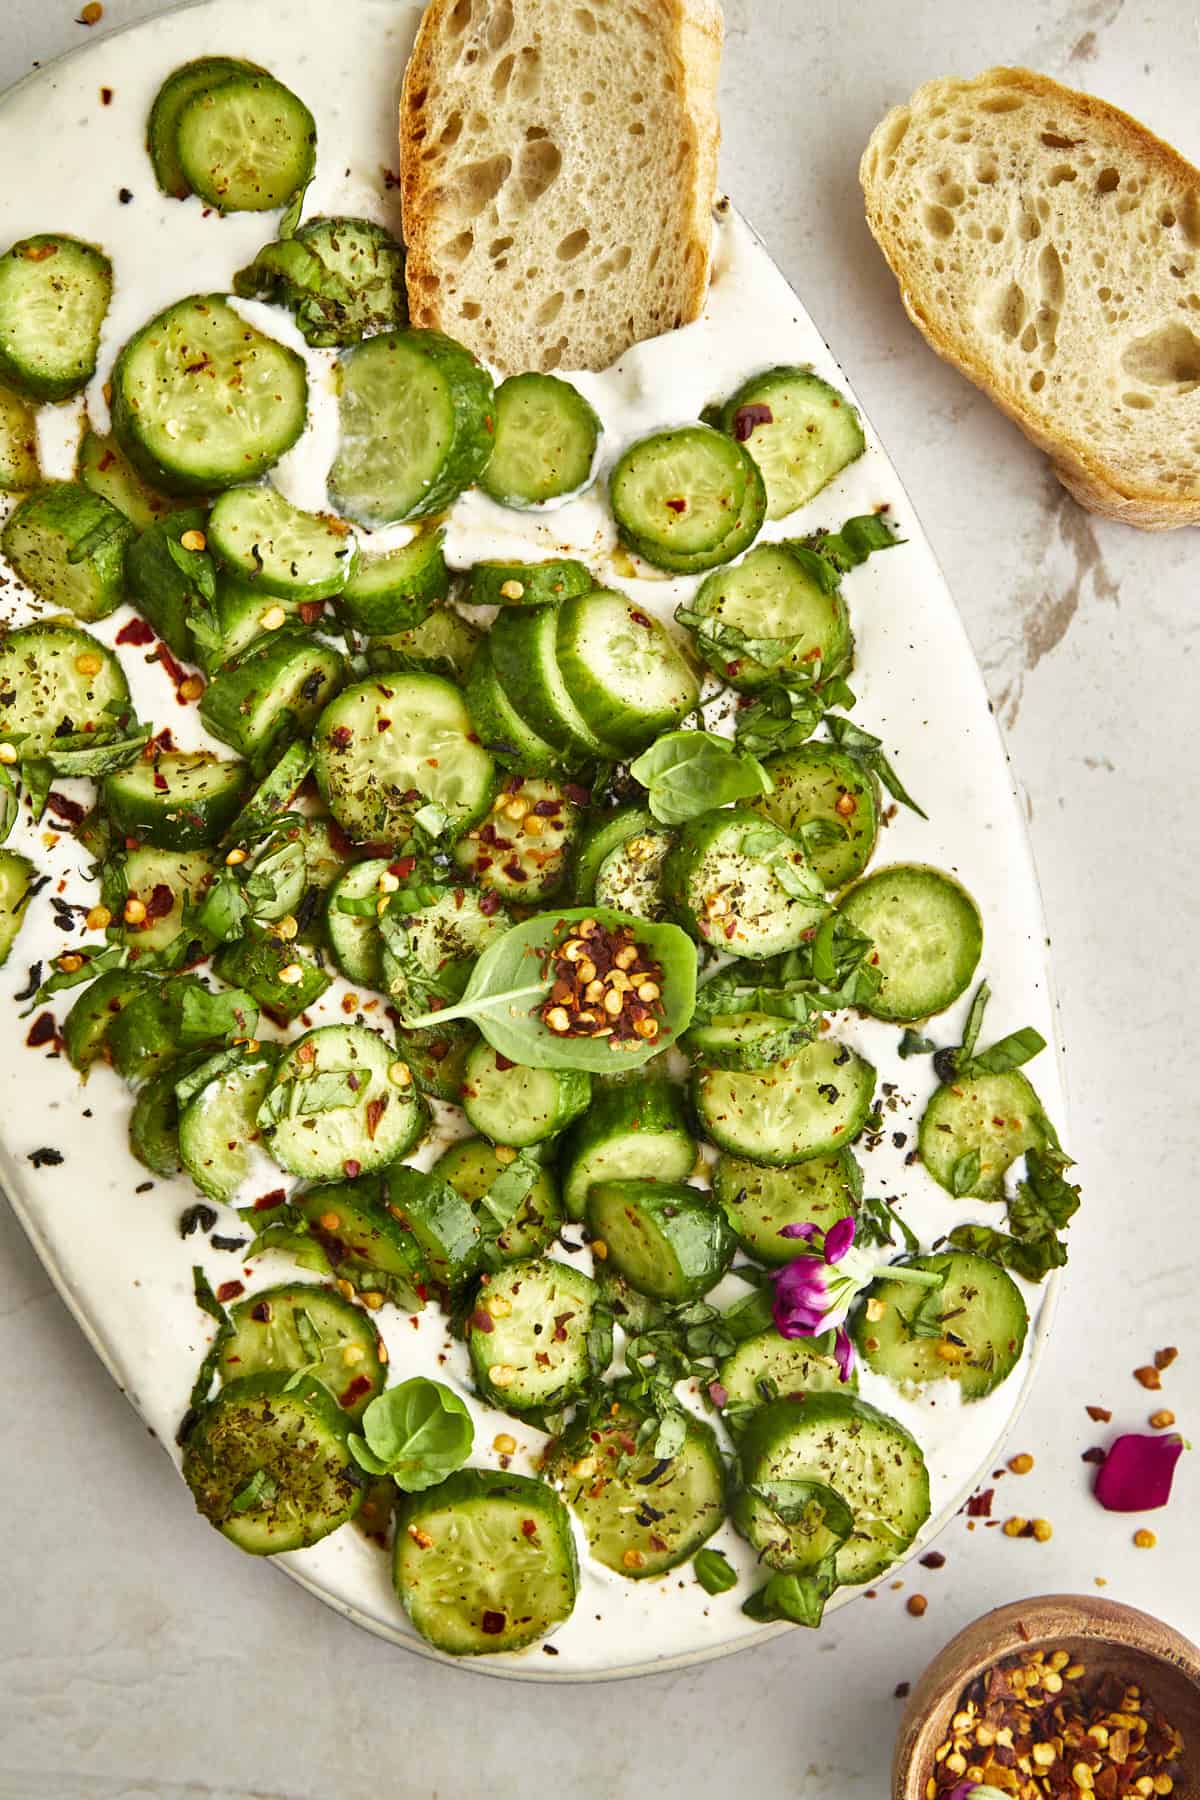 A platter of cucumber cottage cheese dip with two pieces of bread on the side.